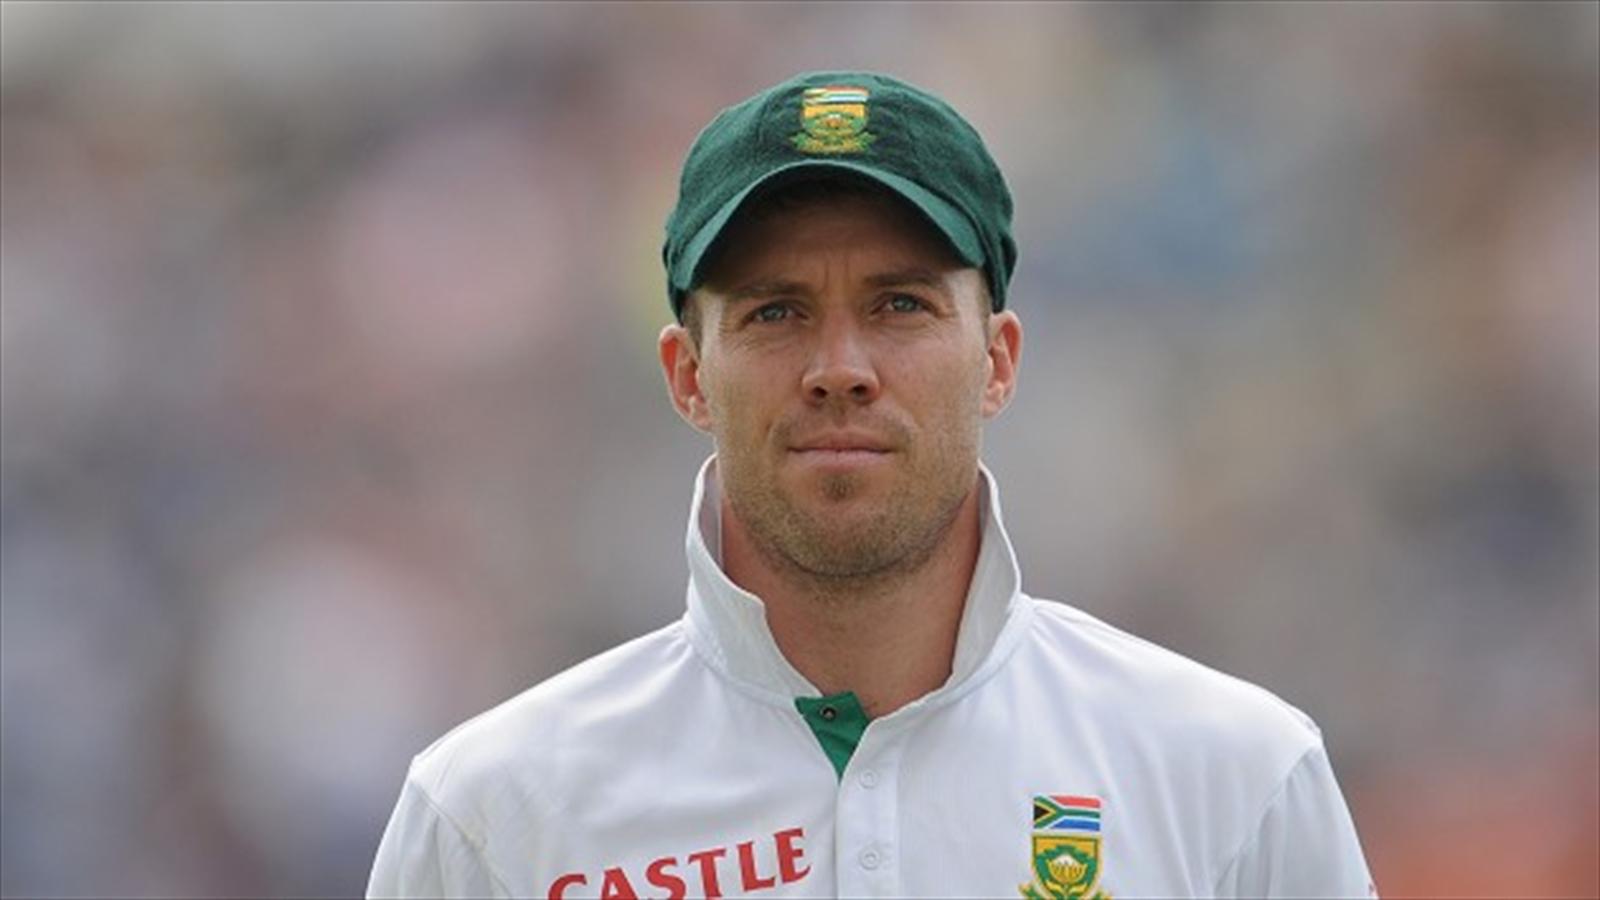  “Remember Losing all respect for AB De Villiers as a captain, and as someone, I looked up to as a cricketing hero”: Khaya Zondo